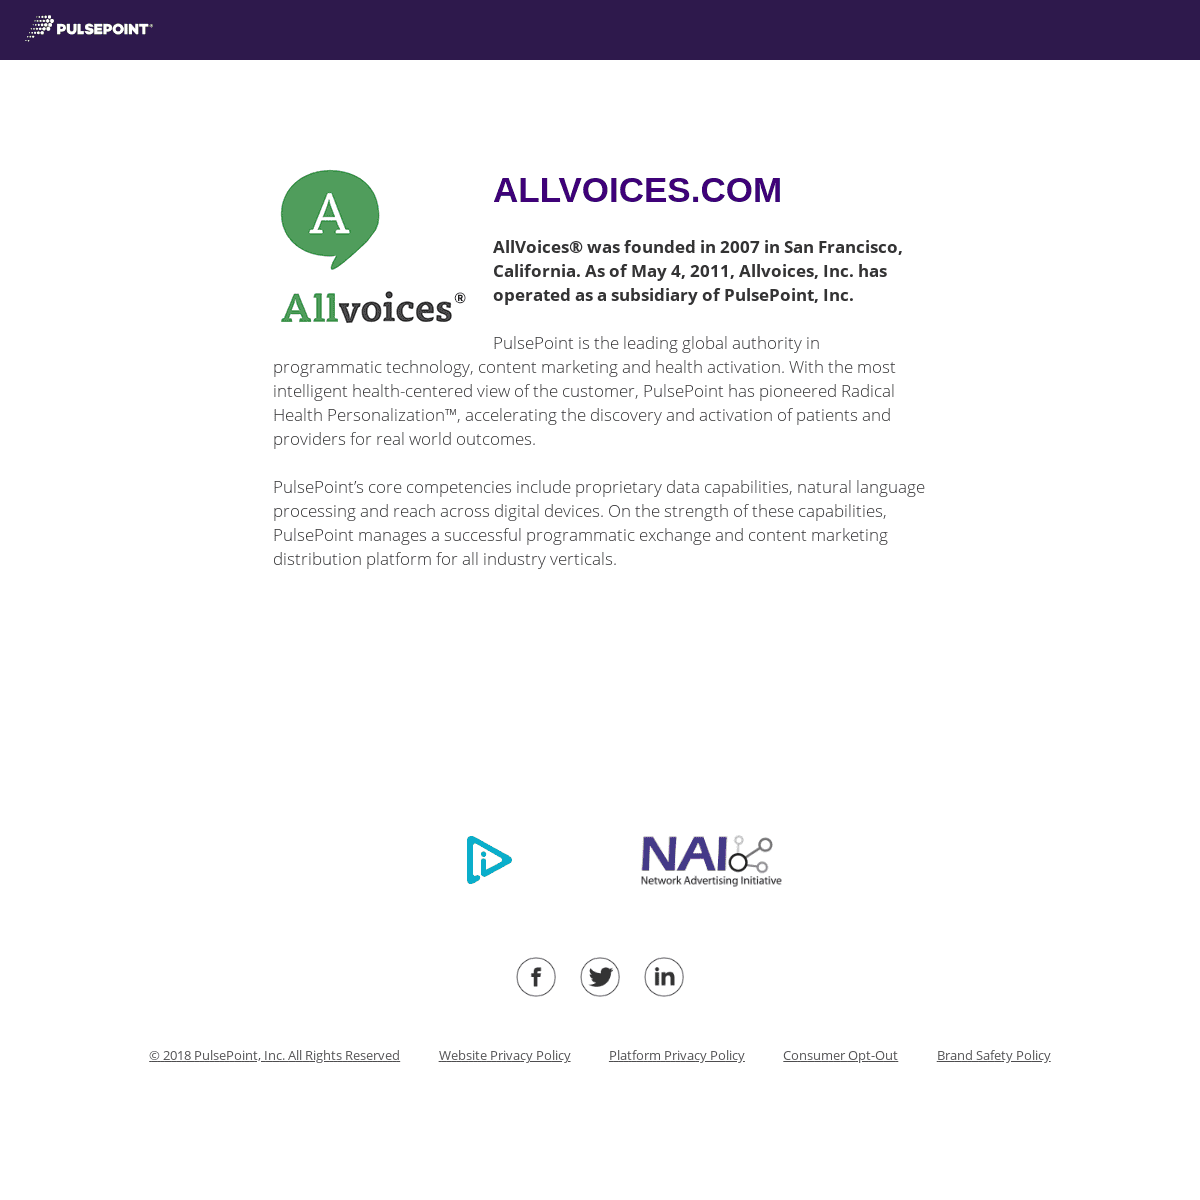 A complete backup of allvoices.com